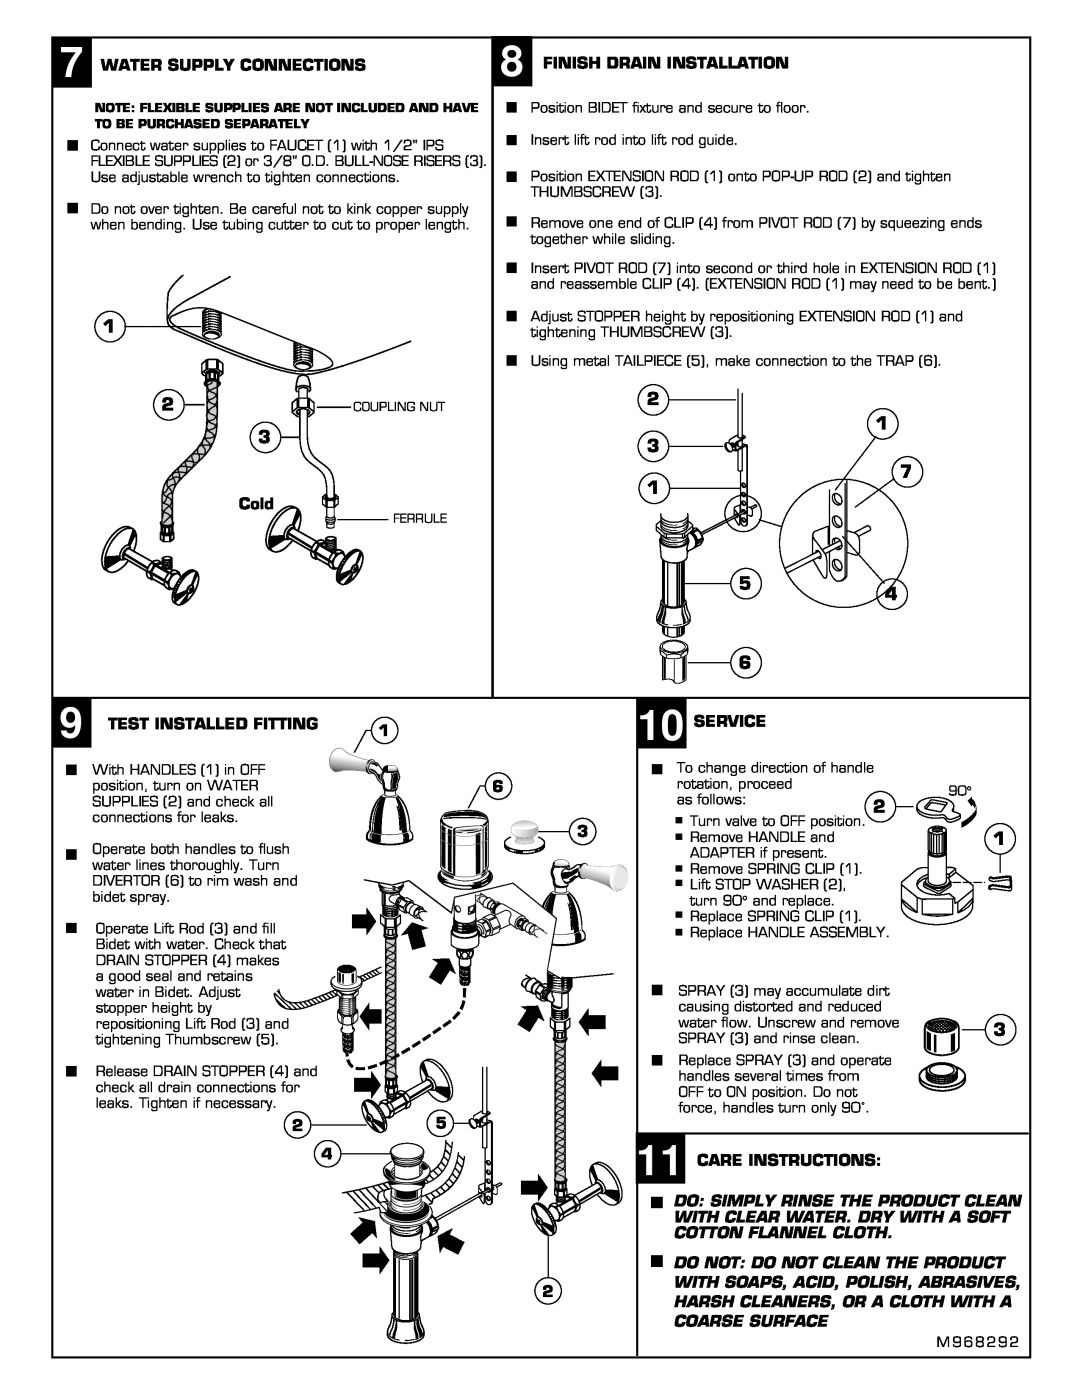 American Standard 2580 installation instructions Water Supply Connections 